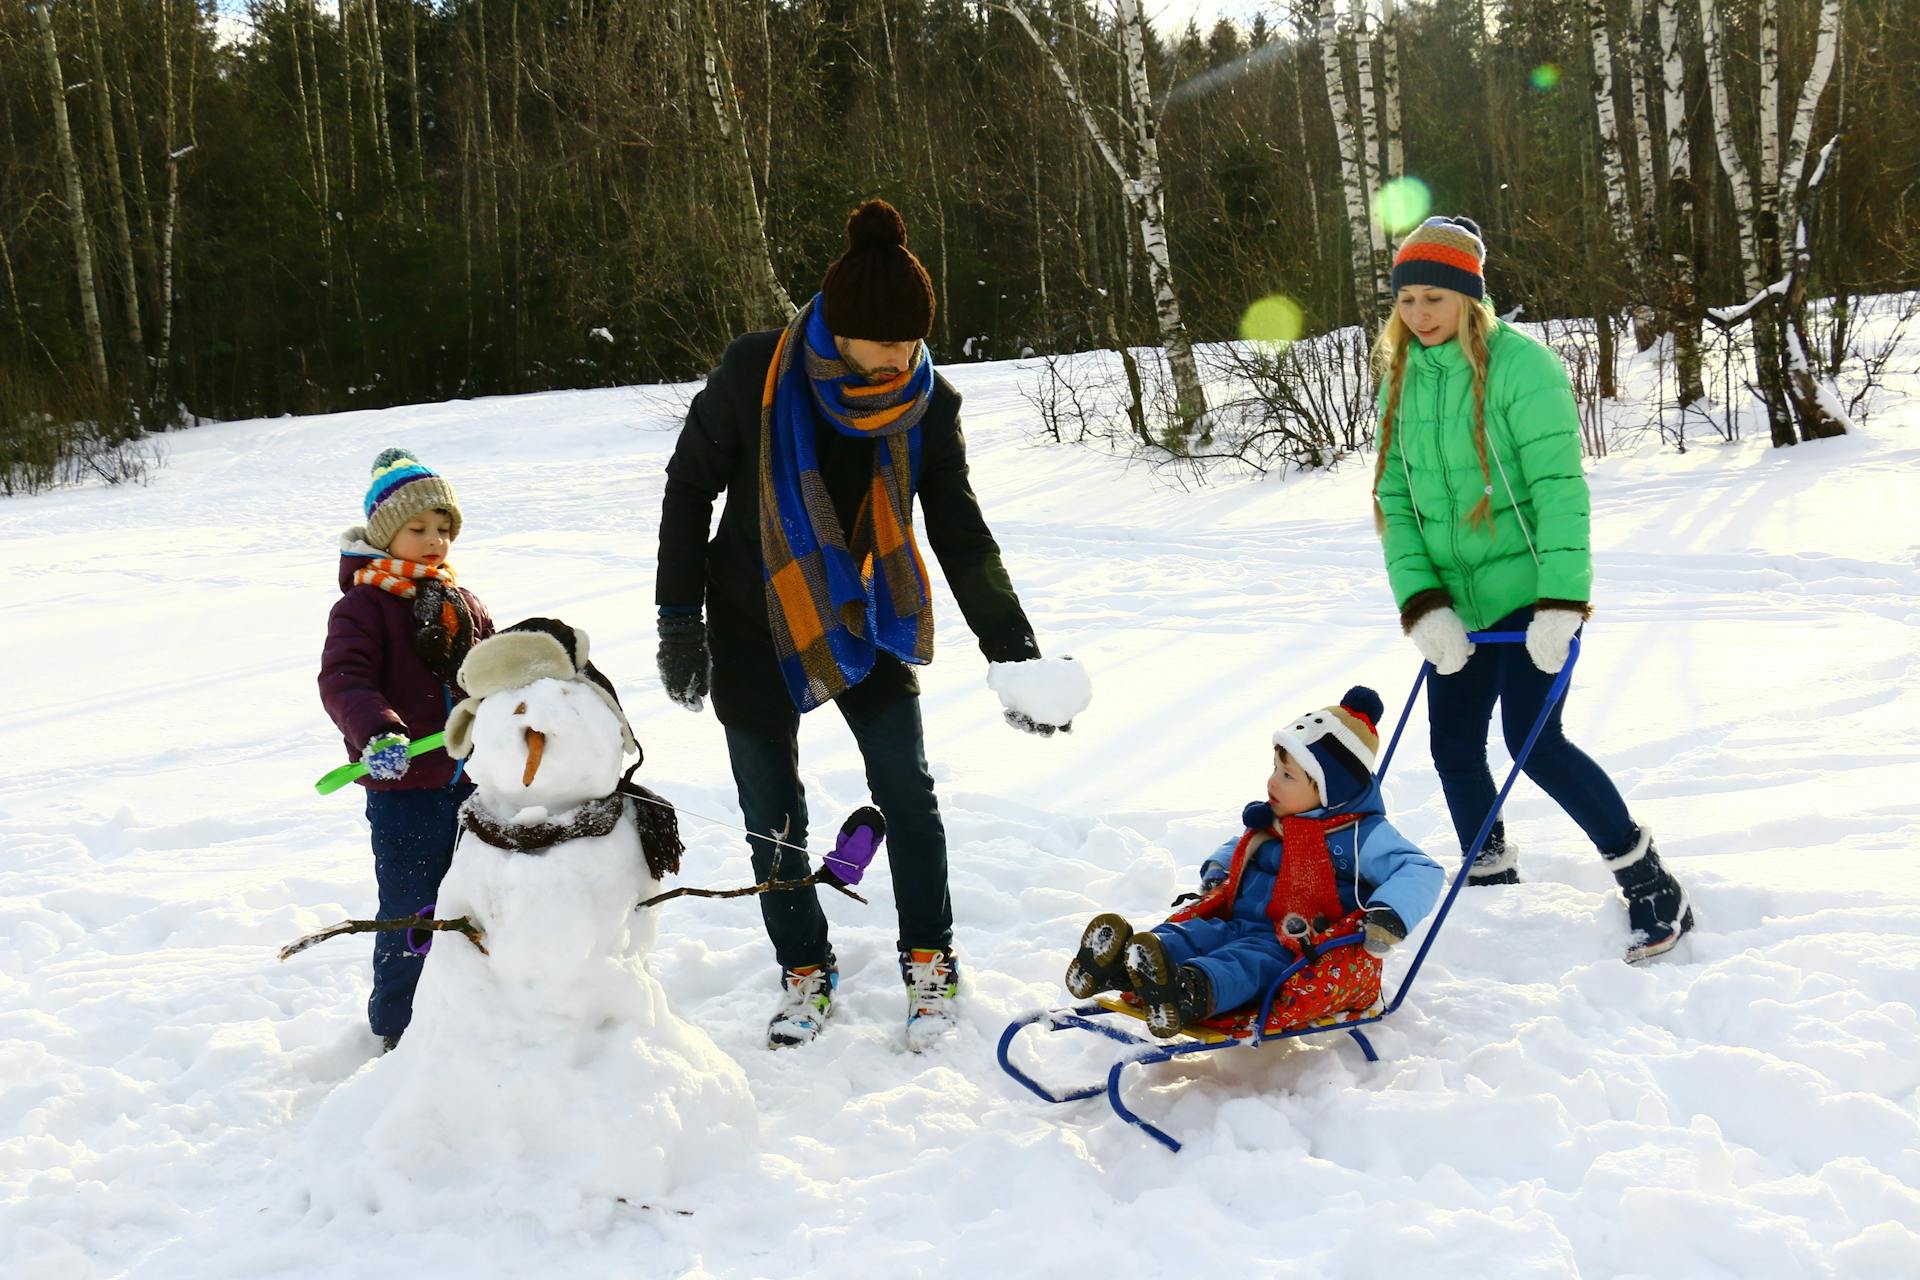 A family playing in the snow.